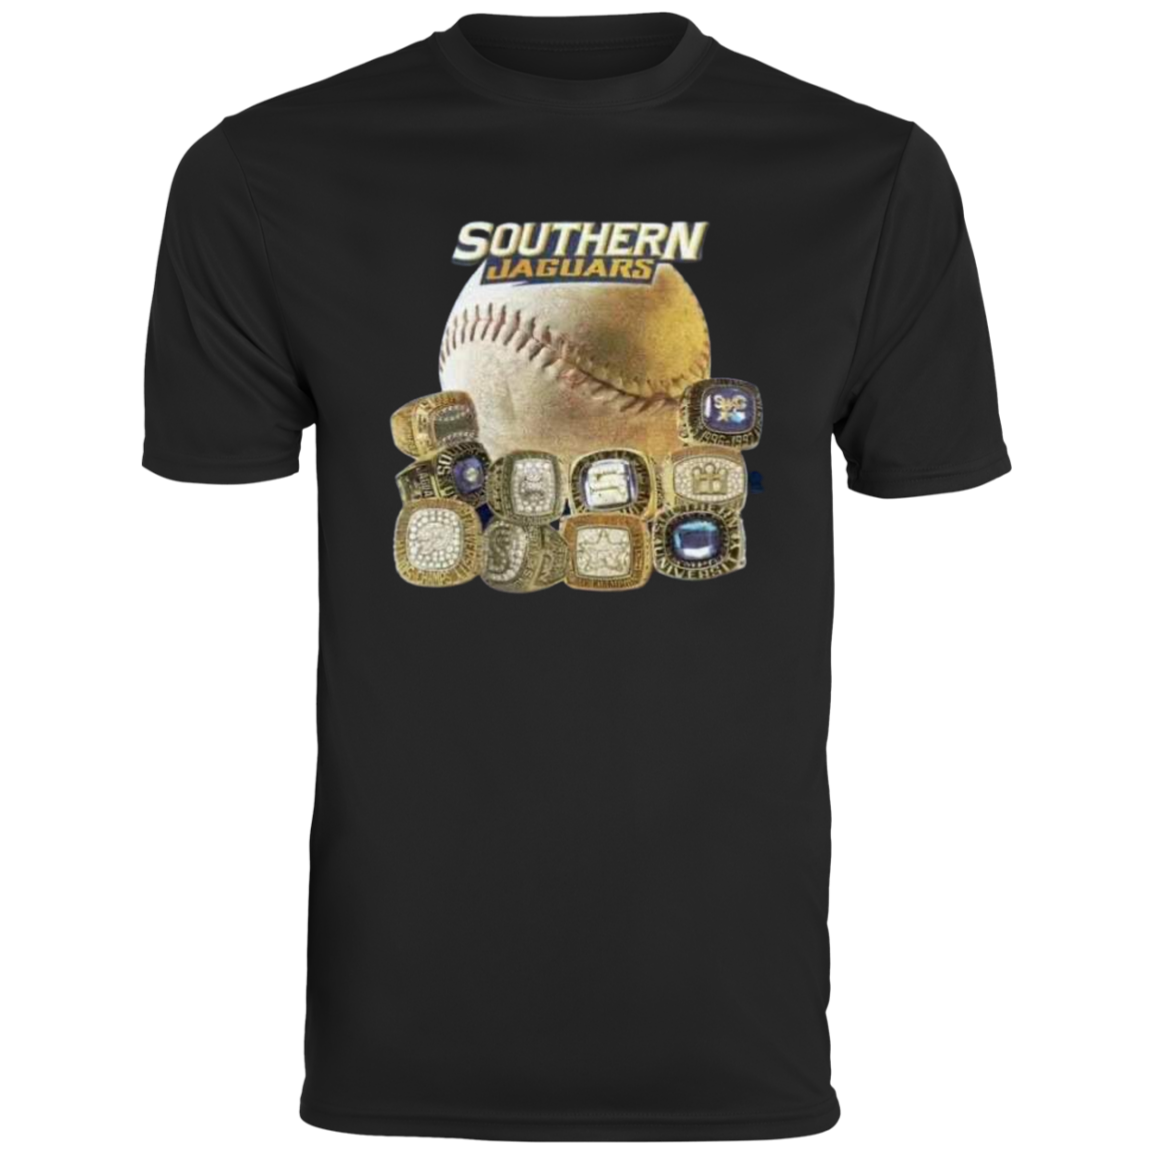 SWAC Champs Rings Edition 790 Men's Moisture-Wicking Tee